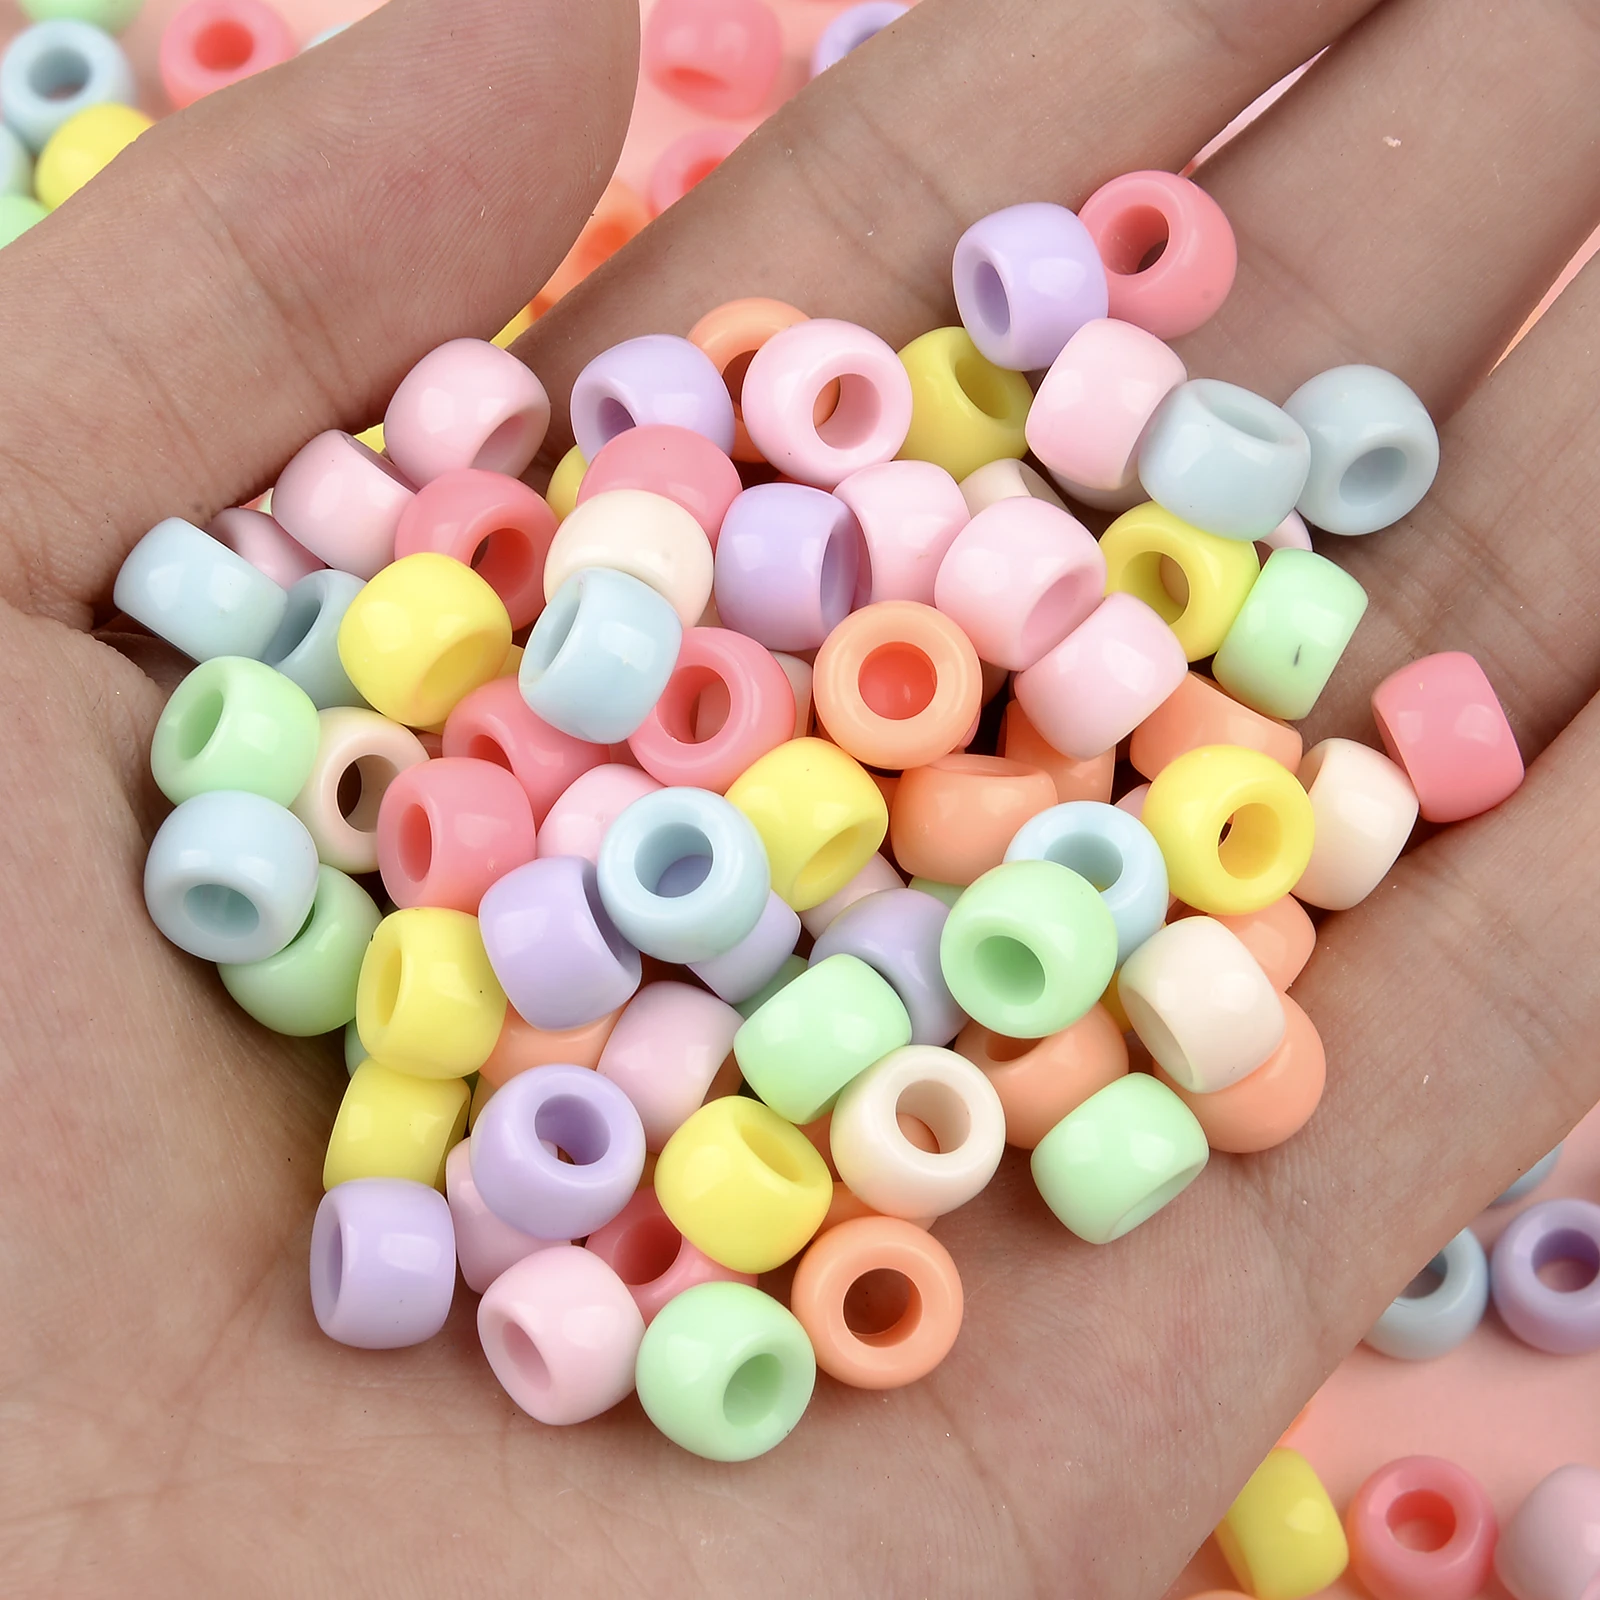 Pink Transparent Plastic Craft Pony Beads 6x9mm Bulk, Made in the USA - Pony  Bead Store